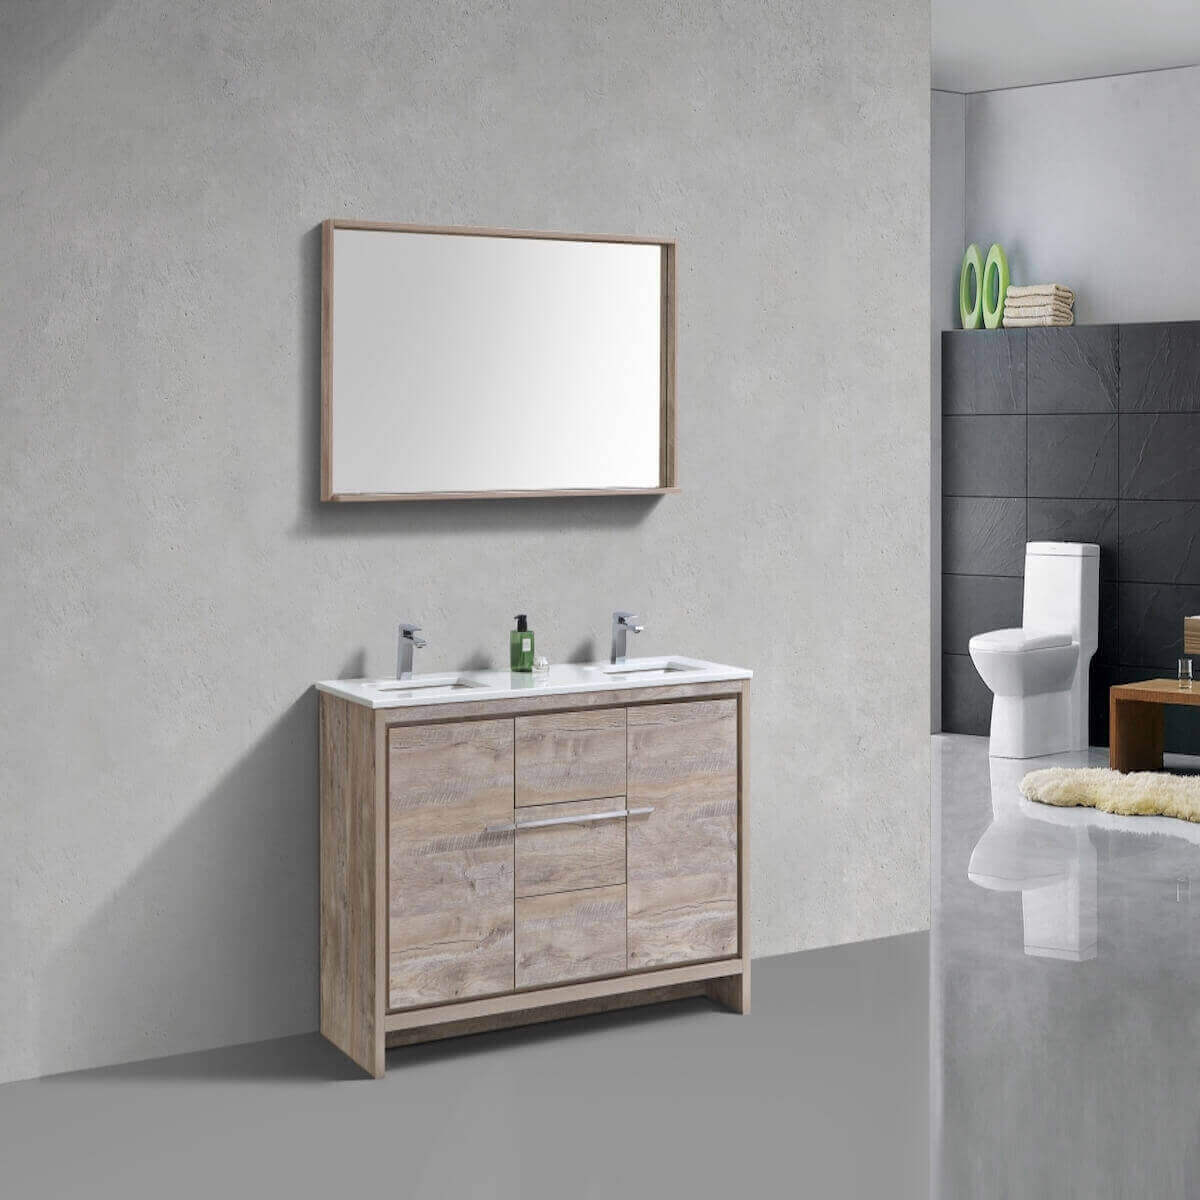 KubeBath Dolce 60" Nature Wood Freestanding Double Vanity with Quartz Countertop AD660DNW in Bathroom #finish_nature wood